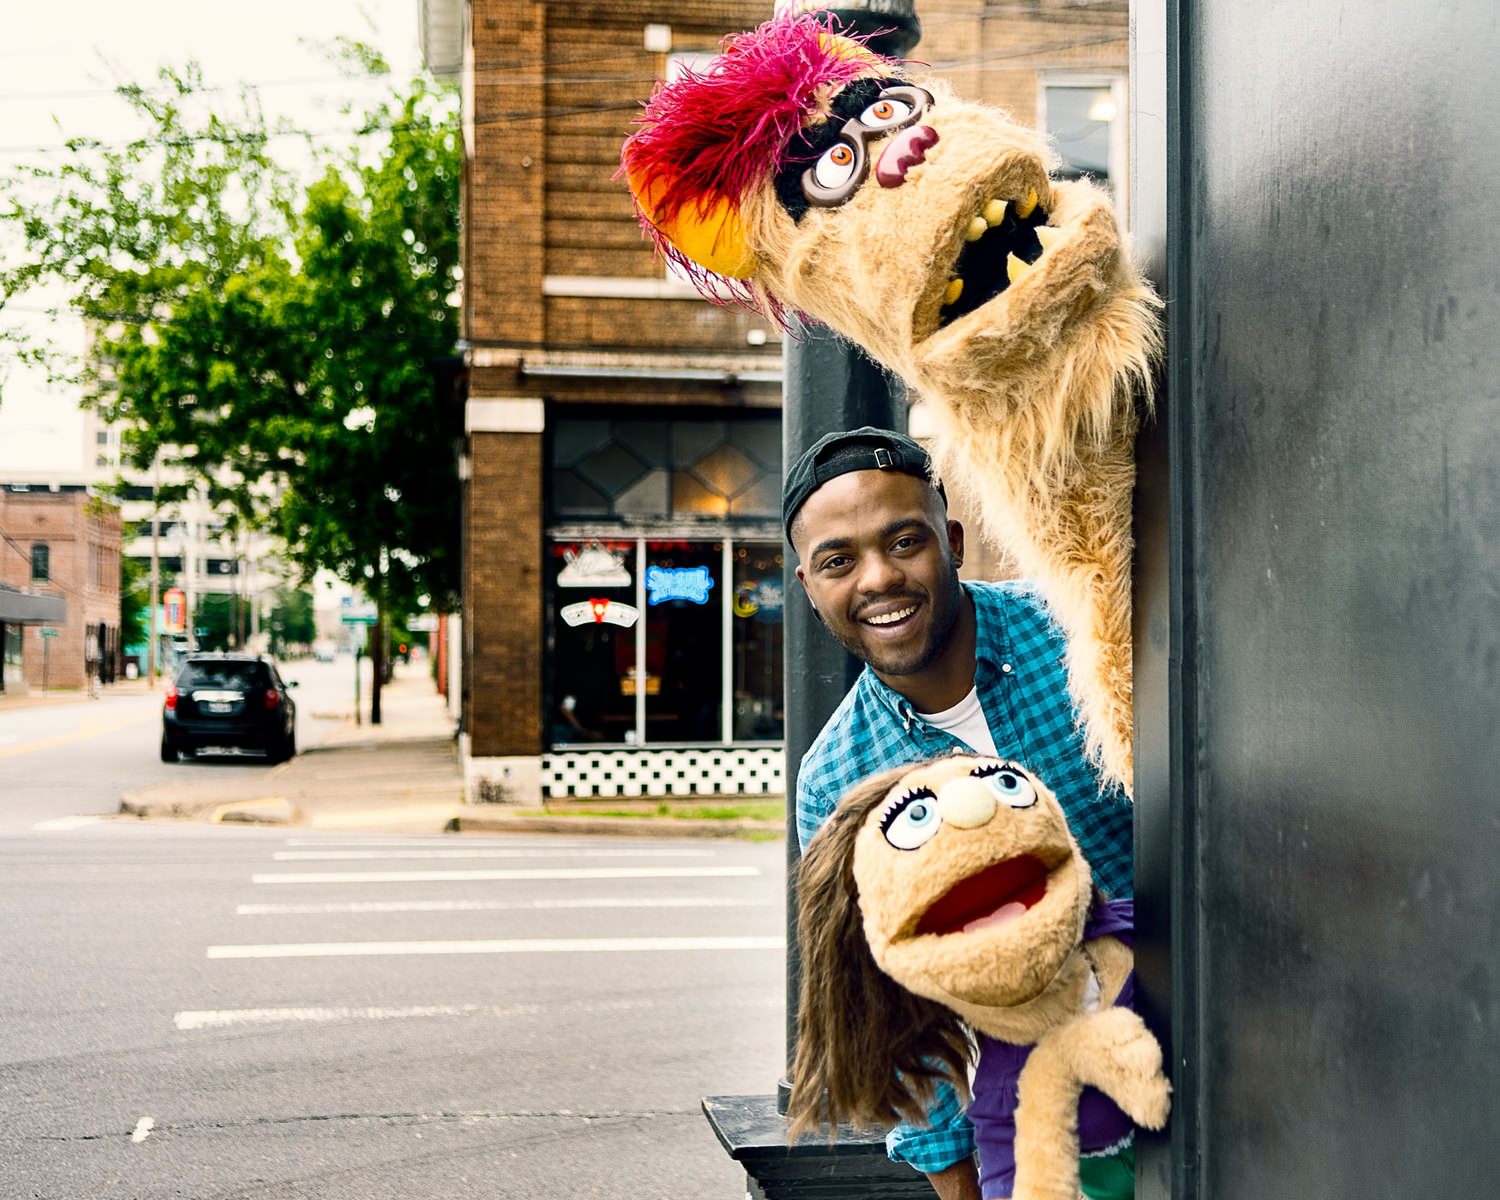 Willie Lucius (Gary Coleman) and his friends Trekkie and Kate Monster are part of Avenue Q, running June 14-30 at The Weekend Theater in Little Rock, Arkansas.